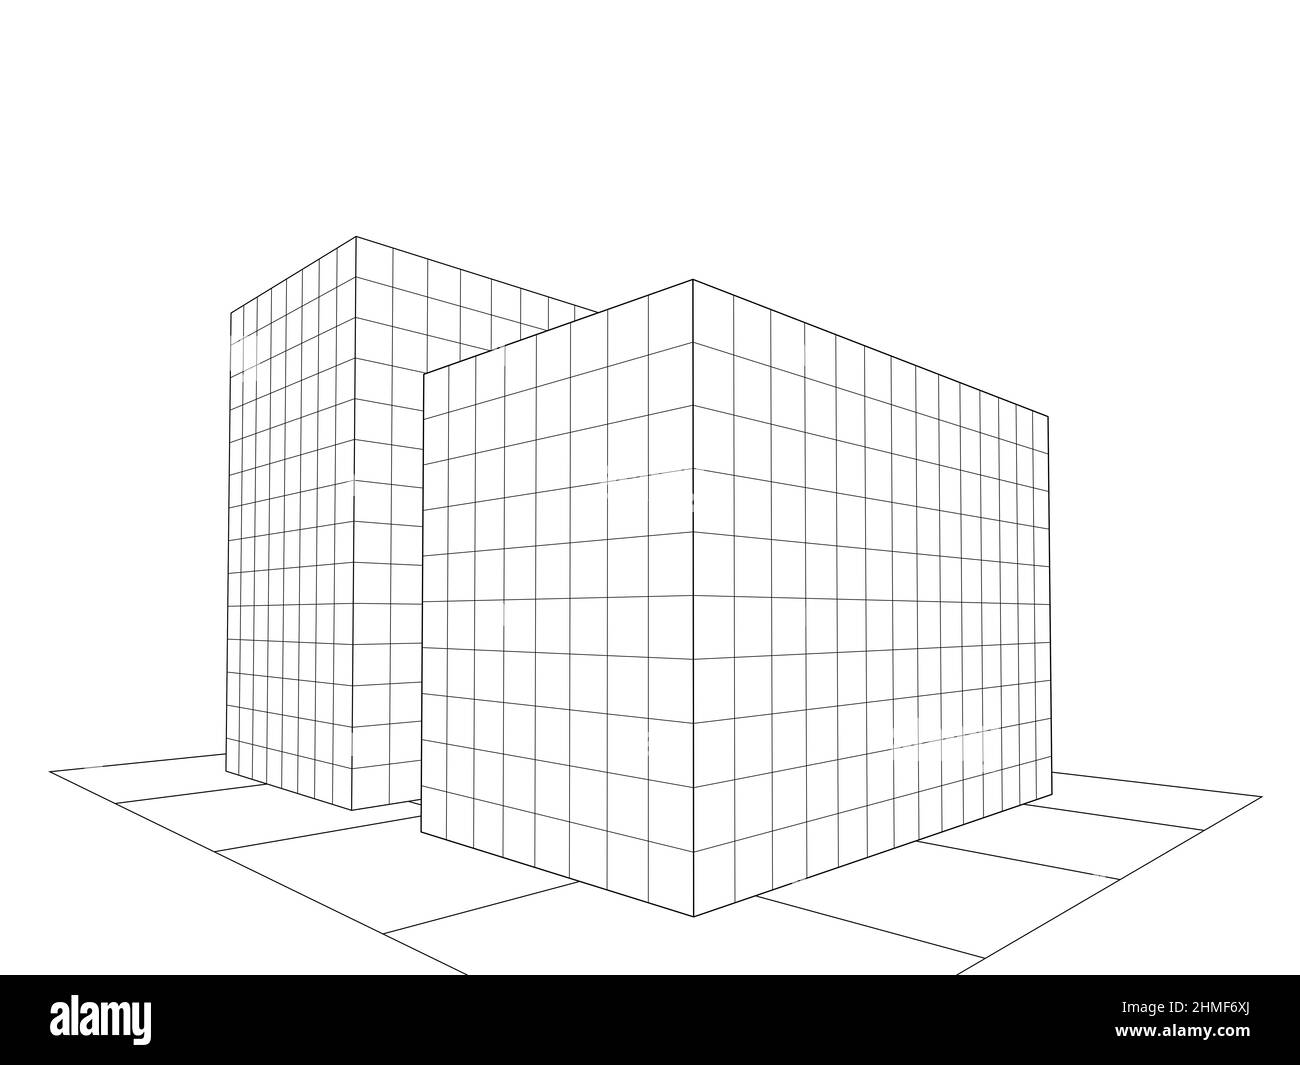 perspective view of buildings wireframe, 3d illustration isolated on white background Stock Photo